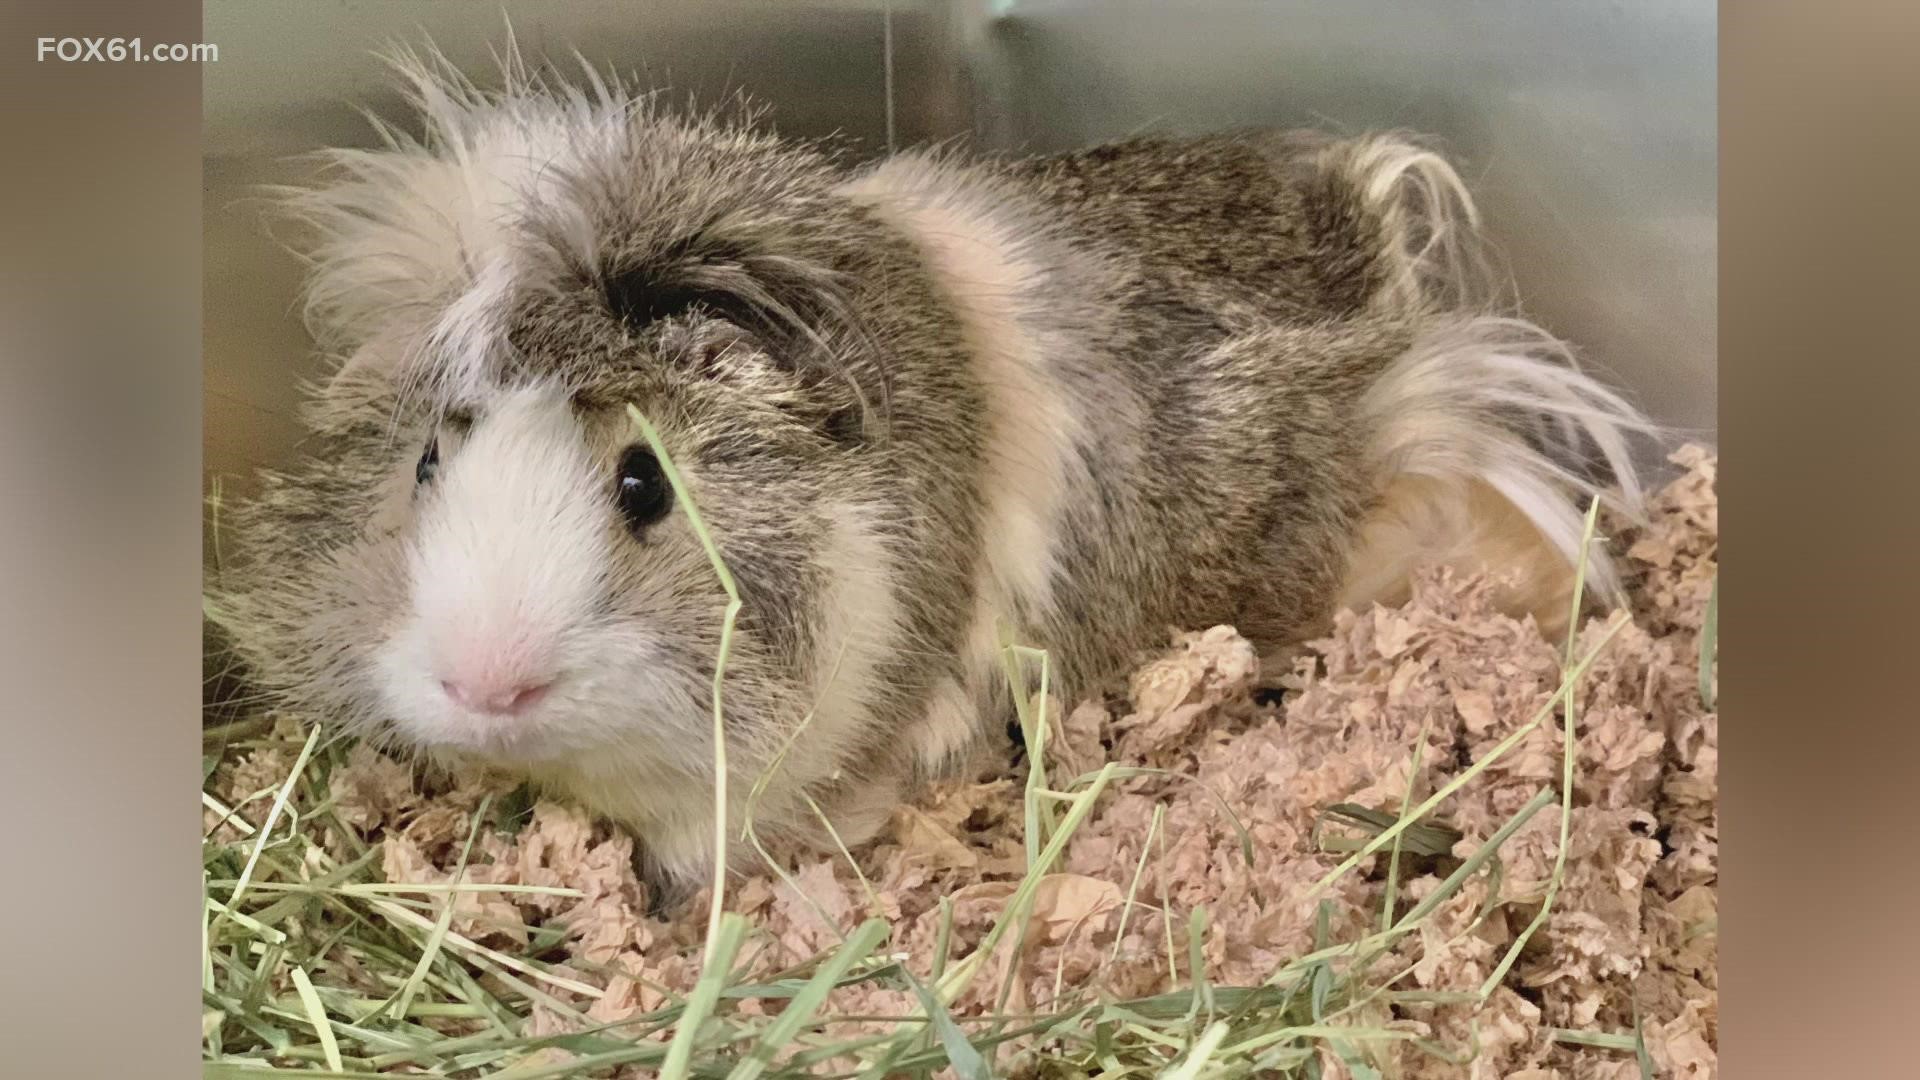 The Connecticut Humane Society introduces us to Chardonnay the guinea pig